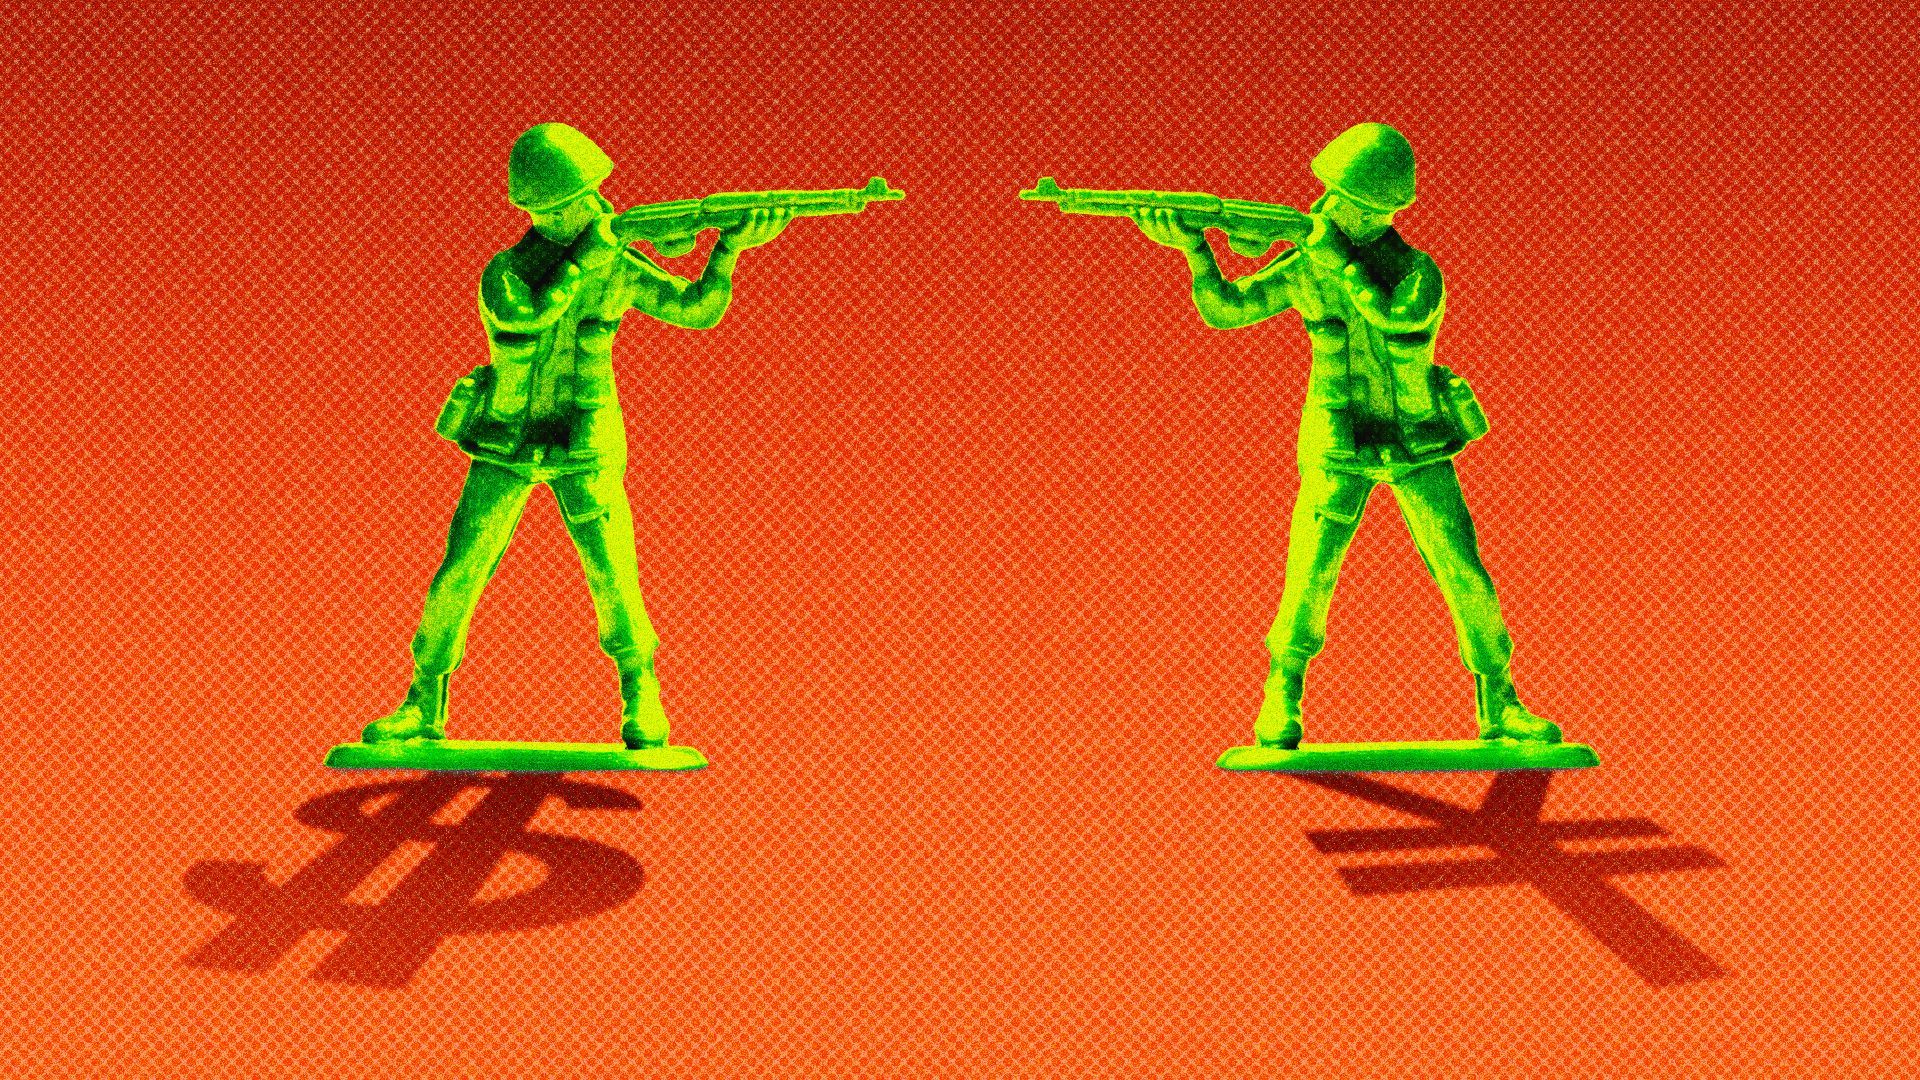 Illustration of two toy soldiers pointing guns at each other. One soldier casts a shadow in the shape of a dollar symbol while the other casts a shadow in the shape of the yuan symbol.